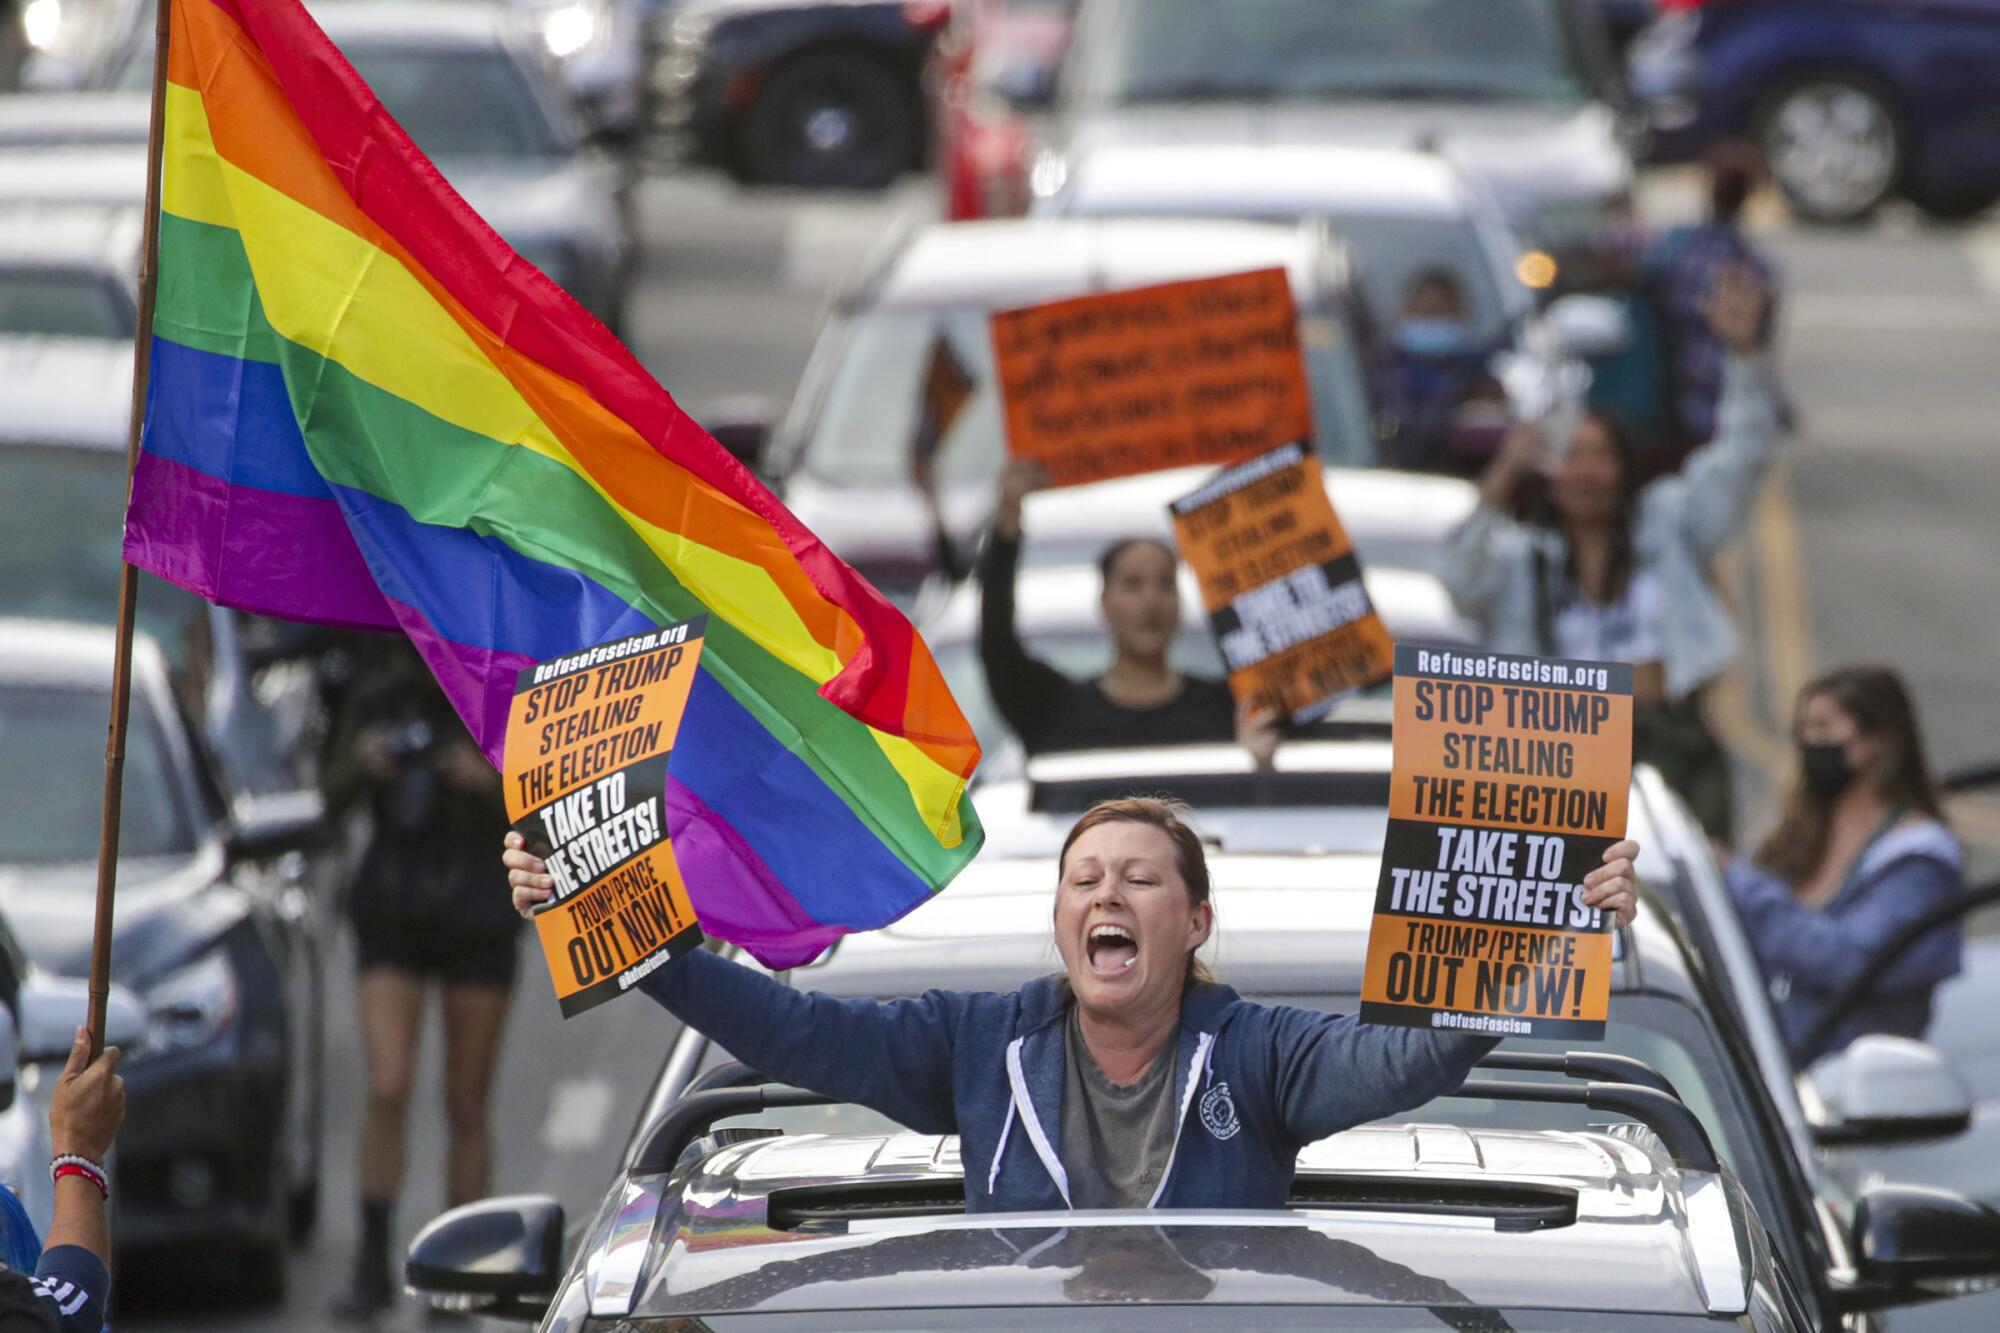 A person in a car sunroof brandishes signs in downtown L.A. 